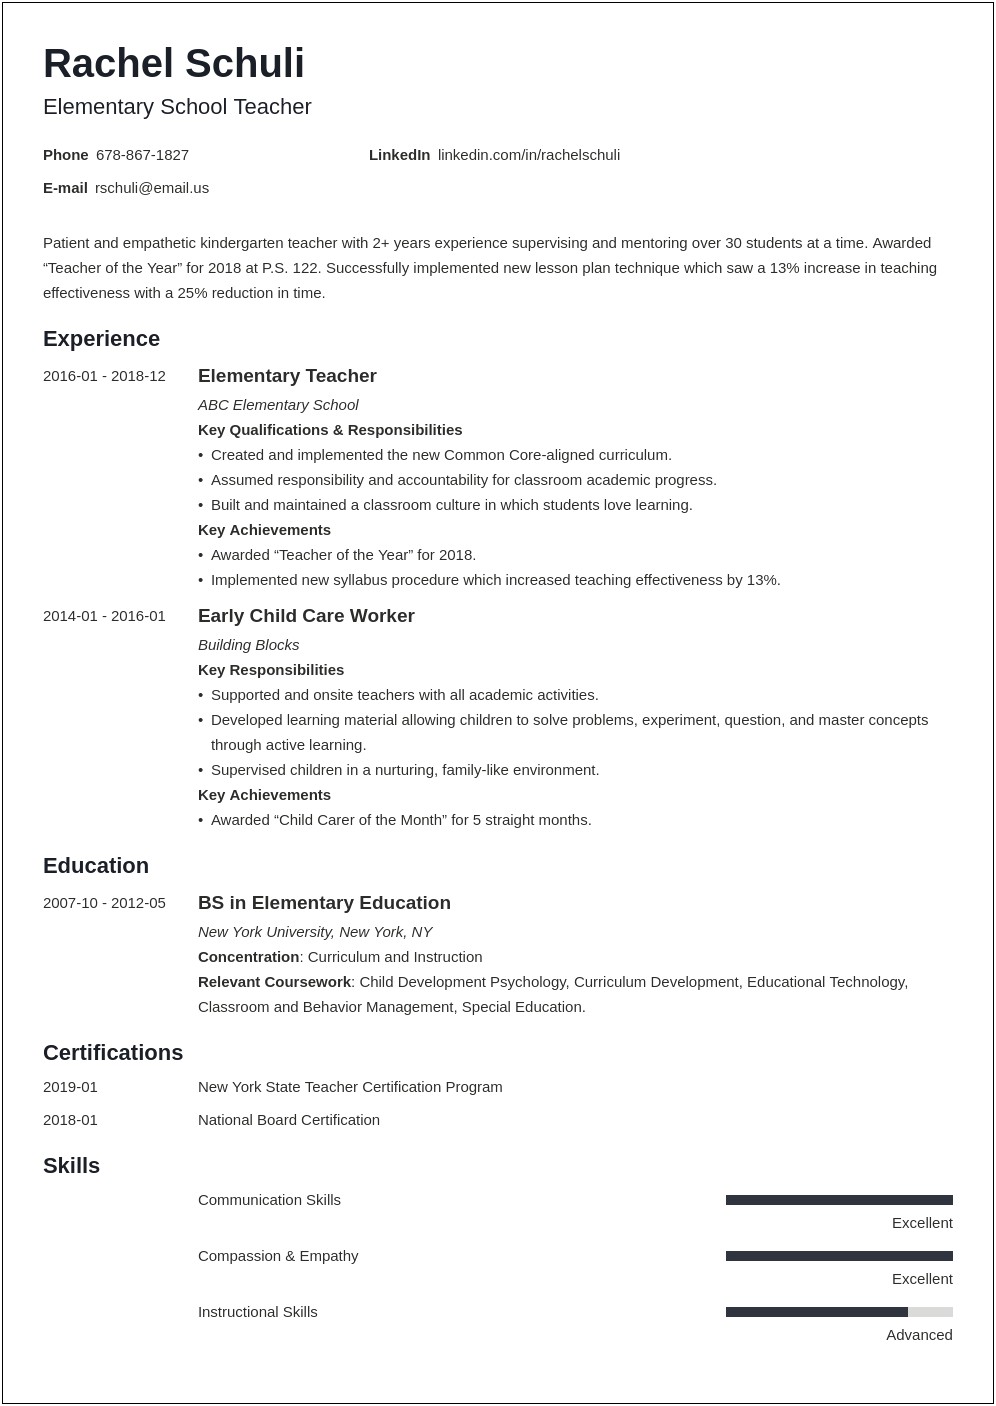 Sample Resume For College Instructor Philippines